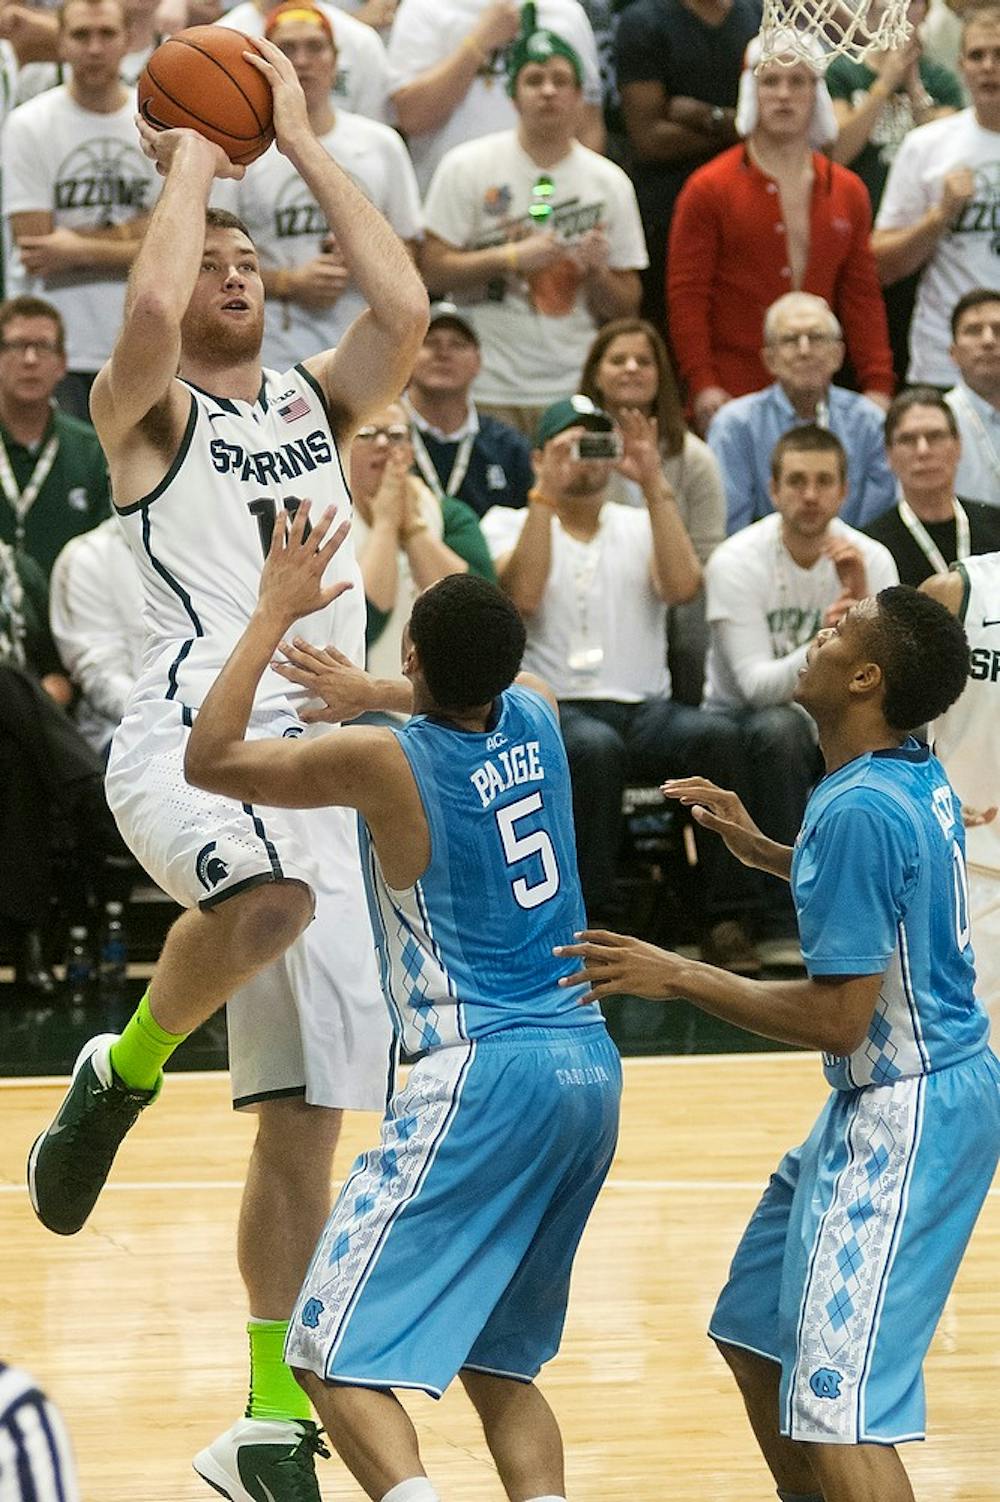 	<p>Sophomore forward Matt Costello jumps up with a rebound during the game against North Carolina on Dec. 4, 2013, at Breslin Center.The Spartans are tied with the Tar Heels at the half, 32-32. Danyelle Morrow/The State News</p>